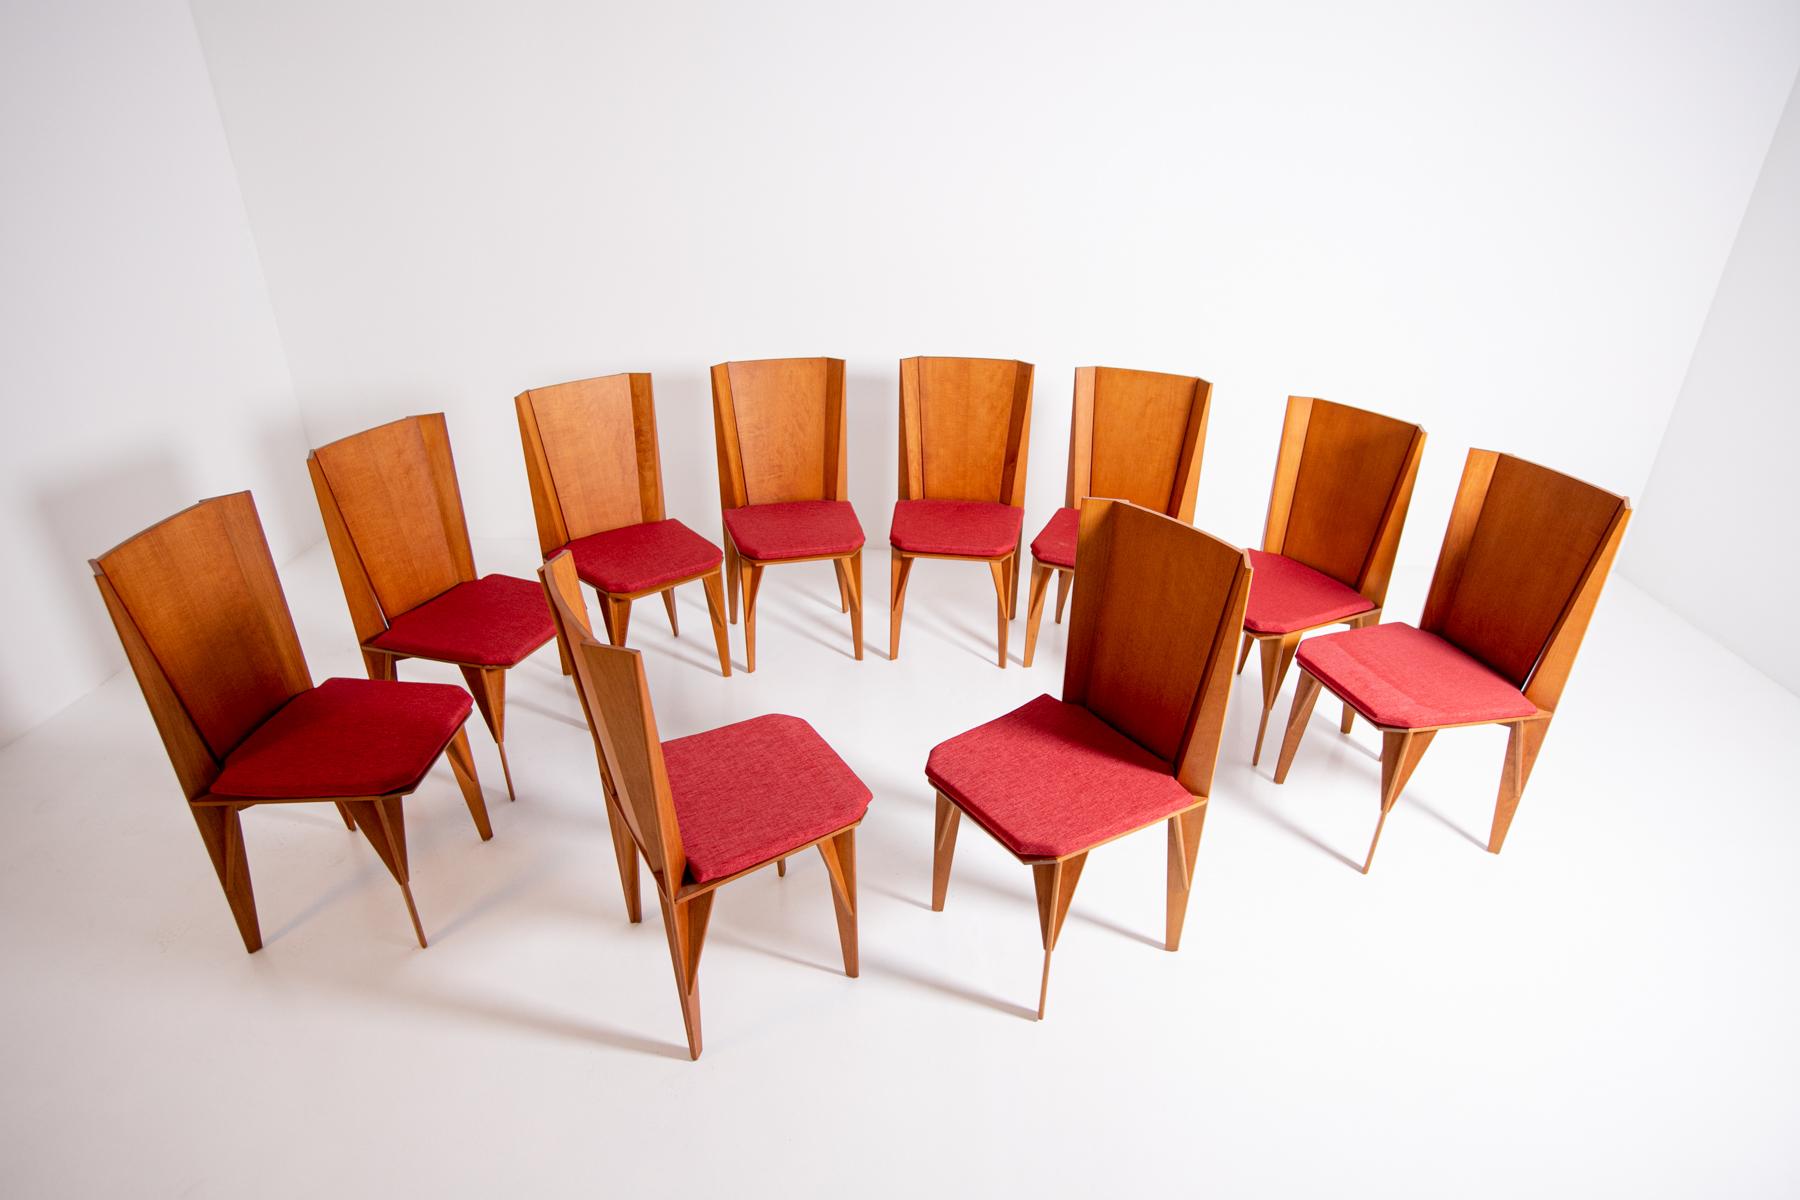 Late 20th Century Italian Chairs Set of Ten by Adriano & Paolo Suman Per Giorgetti, 1984